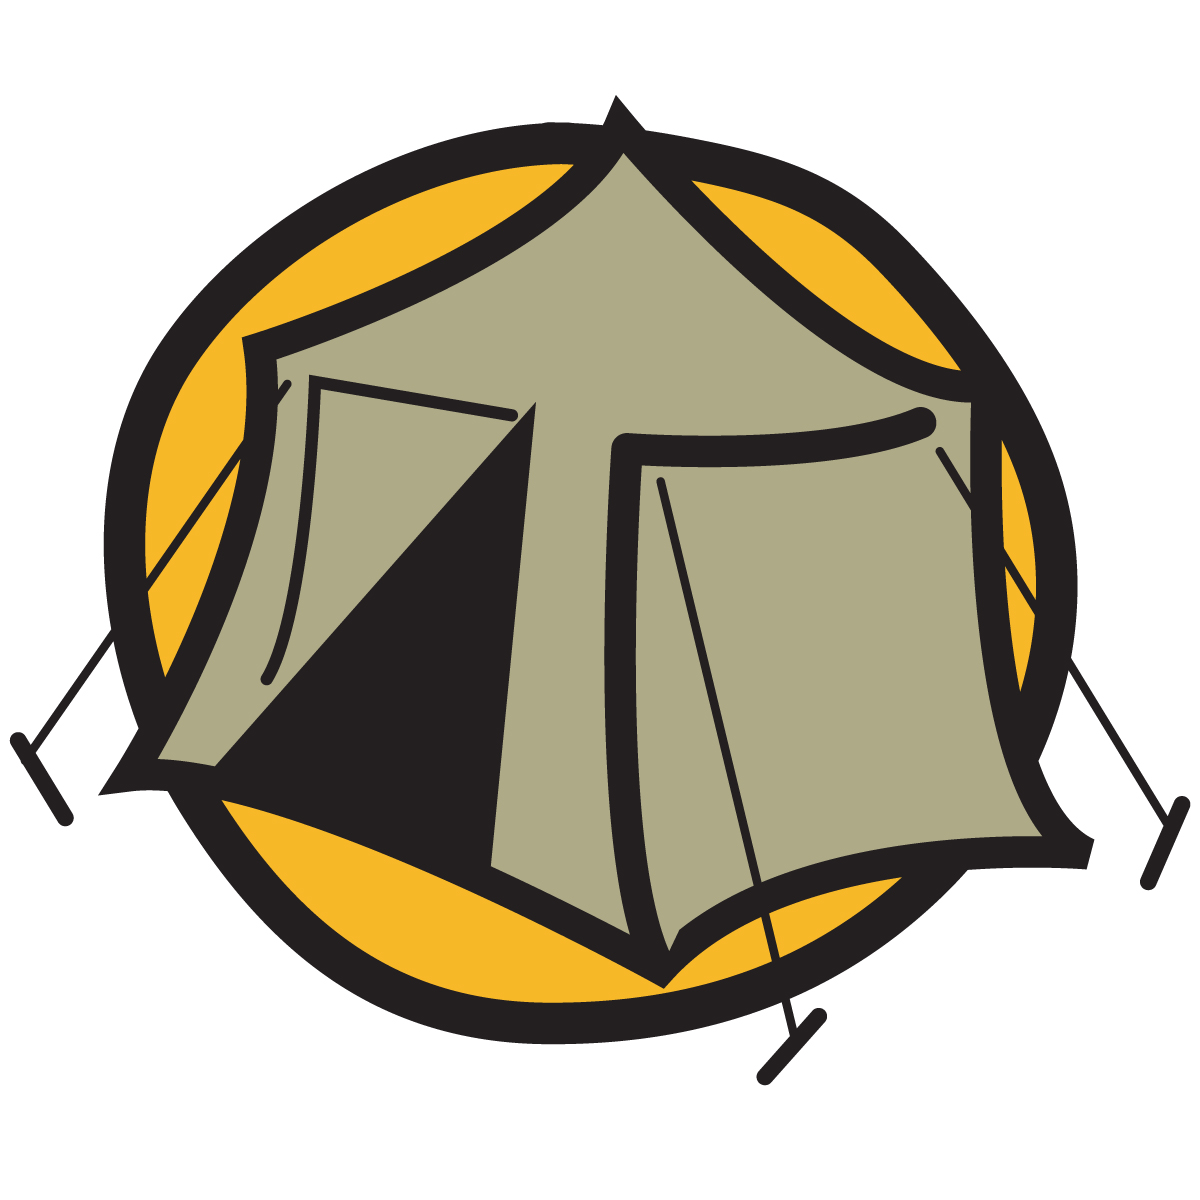 Camping Clipart Free - ClipArt Best